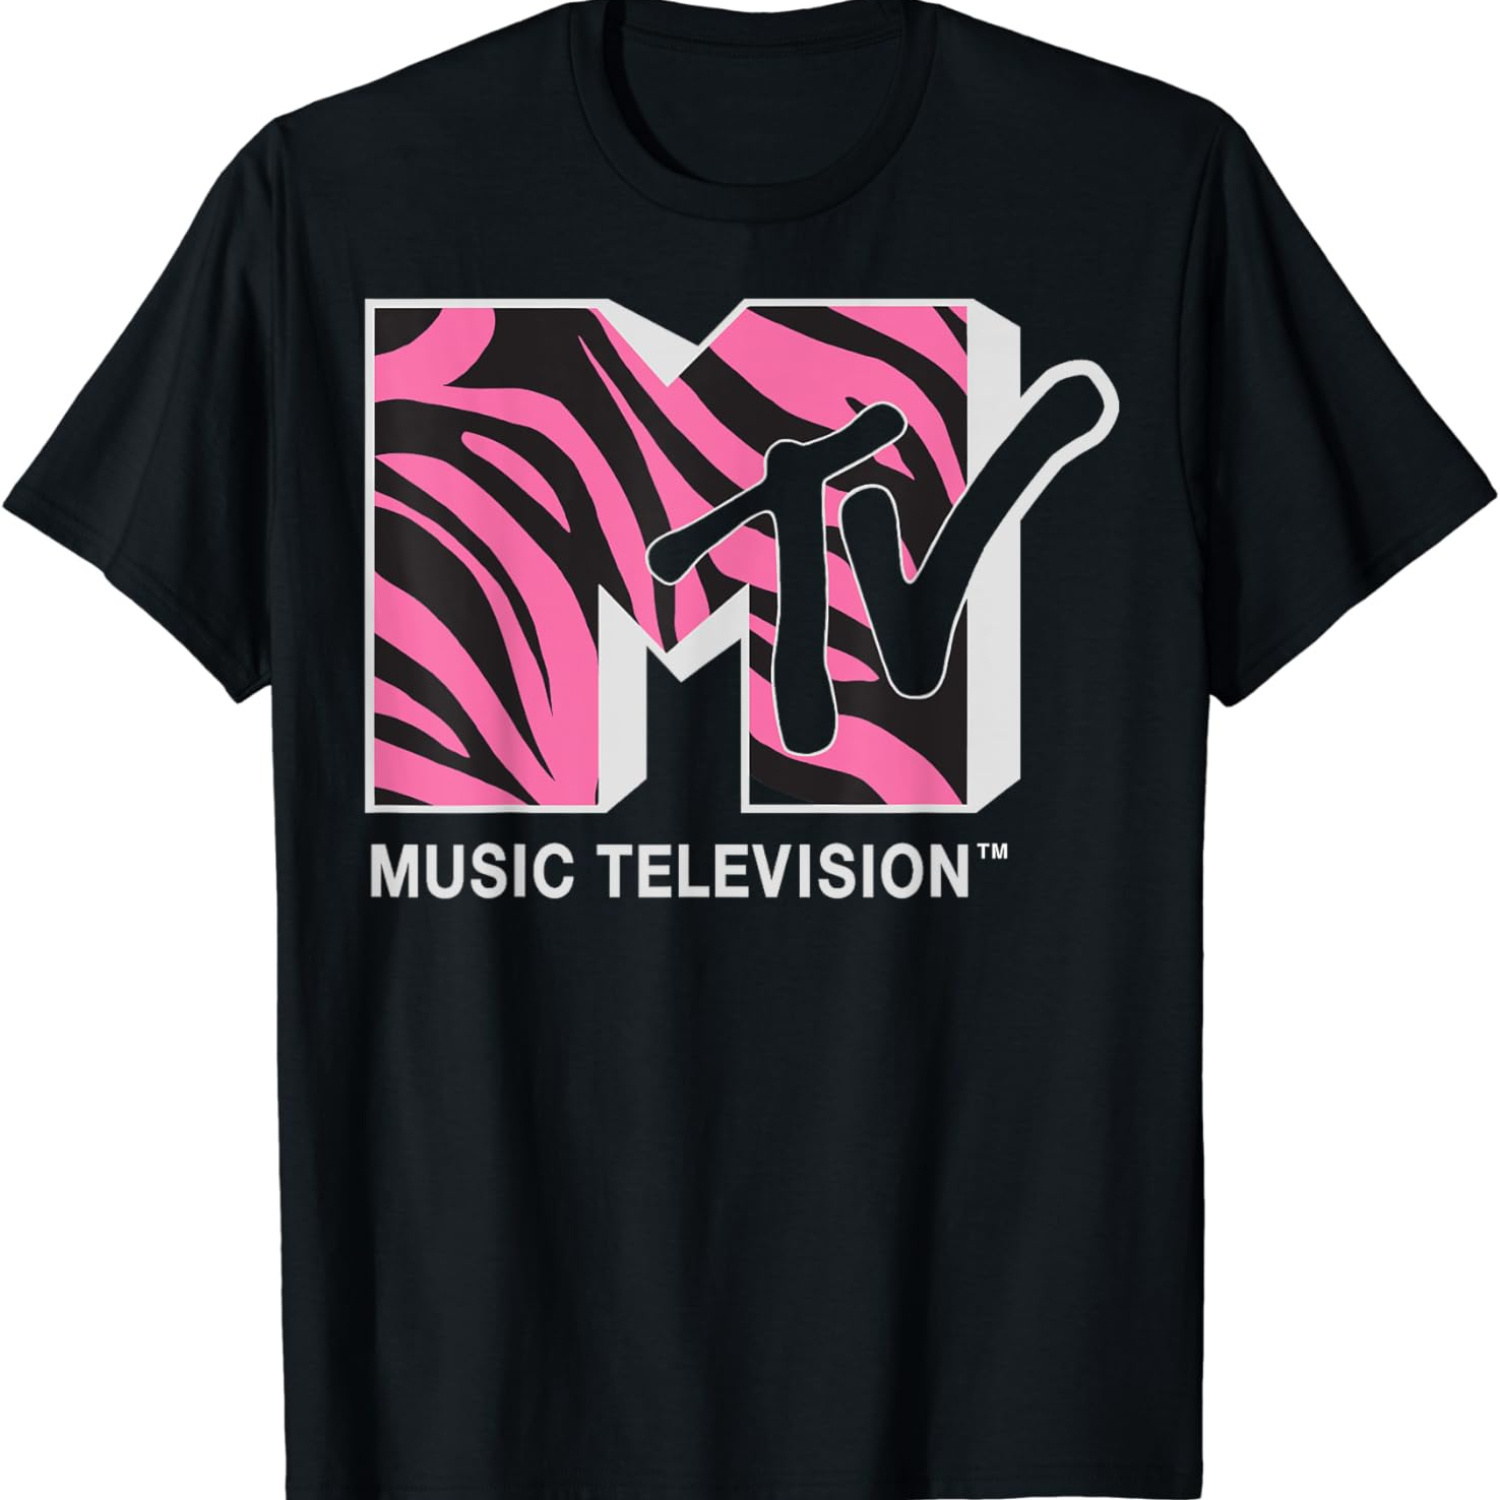 

Mtv Pink And Black Zebra Logo Graphic T-shirt T-shirt, Casual Short Sleeve Top For Spring & Summer, Men's Clothing